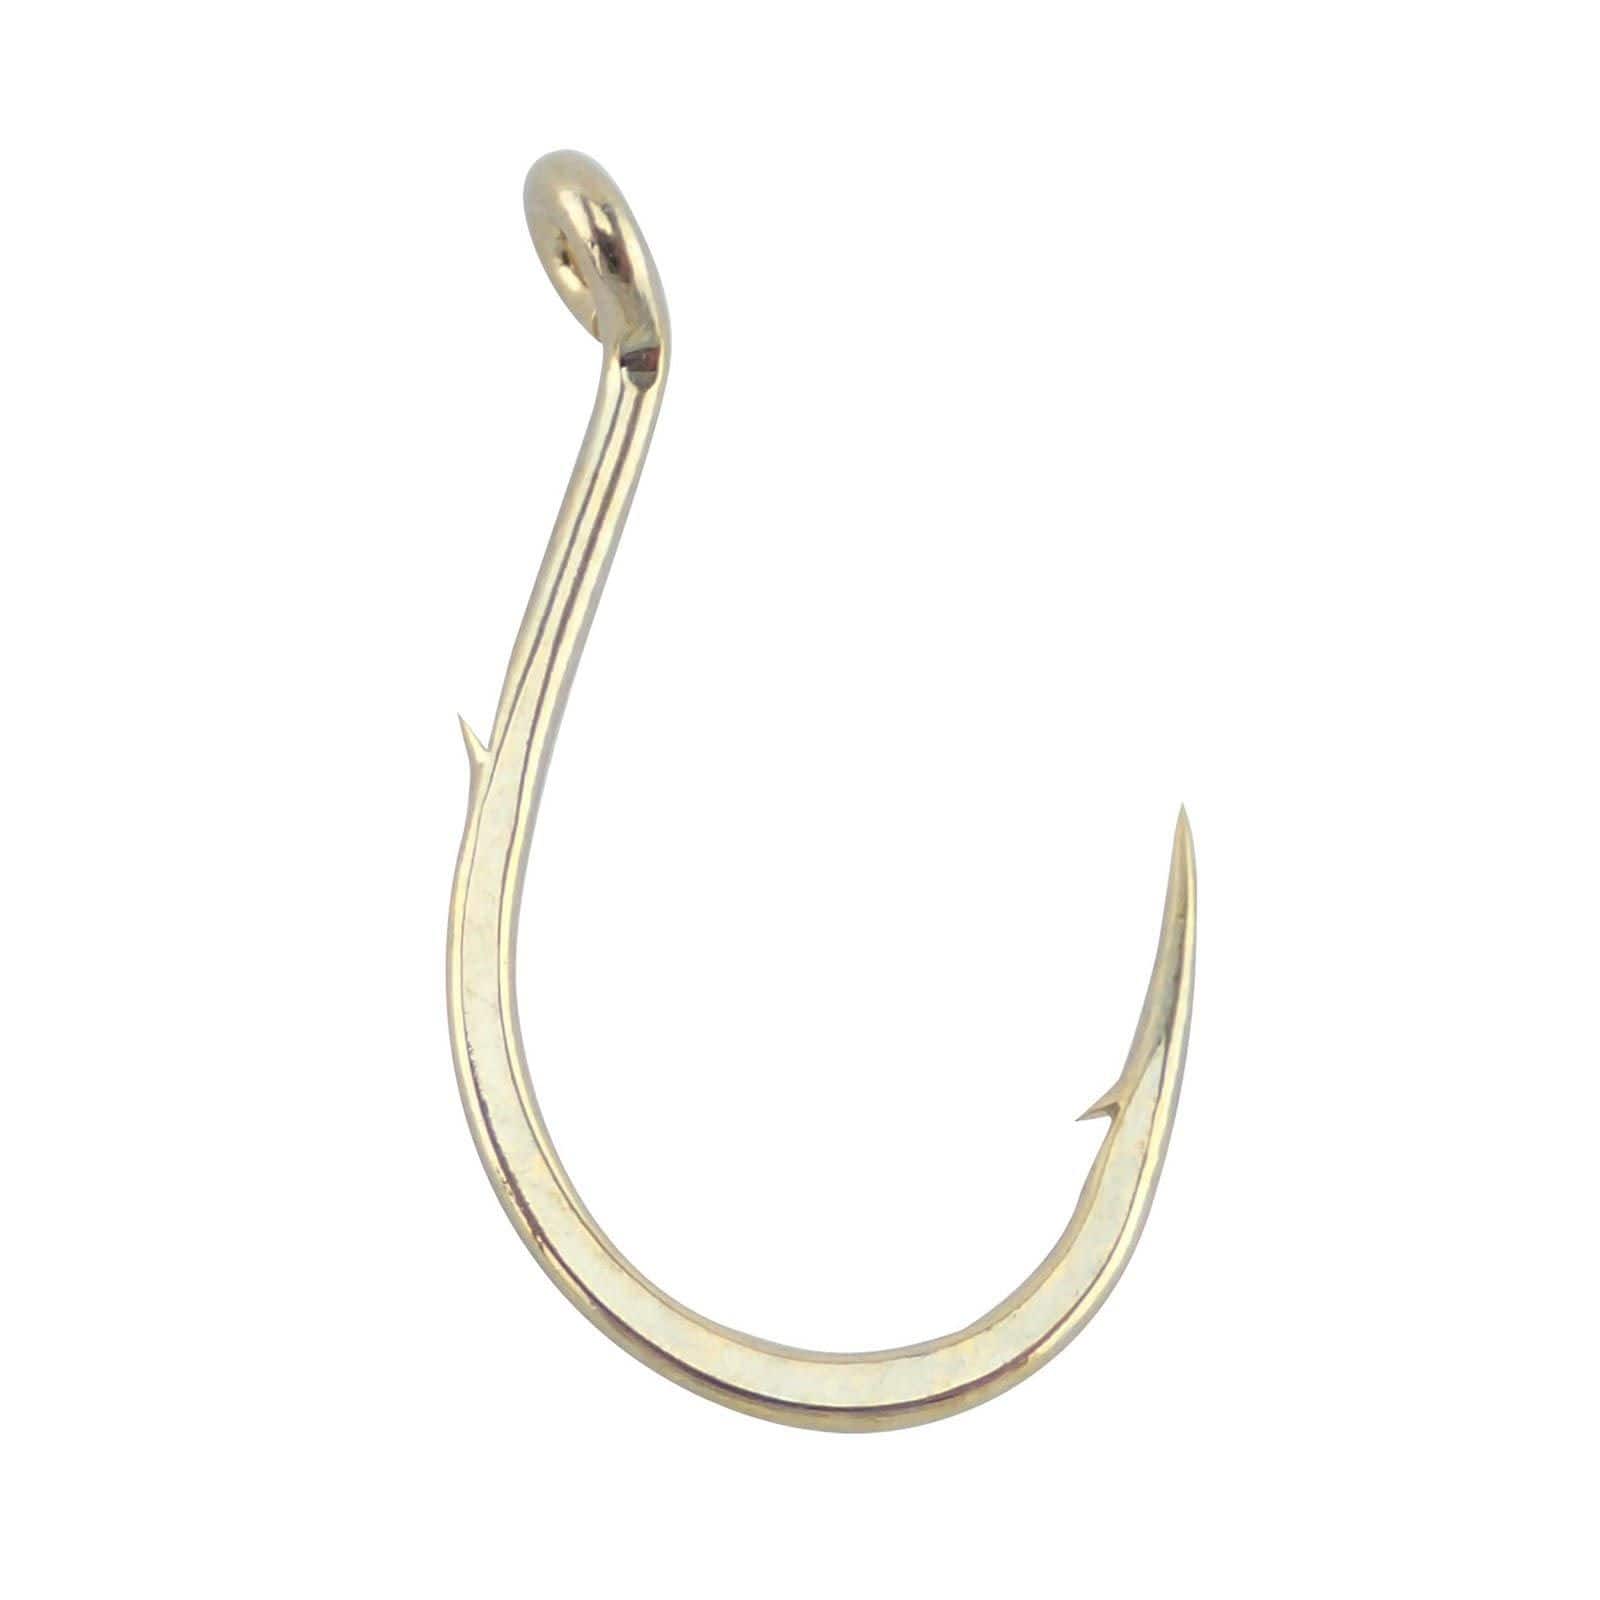 https://media-www.canadiantire.ca/product/playing/fishing/fishing-lures/1781244/gamakatsu-single-egg-hook-gold-10-pack-size-8-b263878d-a5f9-4a46-8a0a-2efb0642a804-jpgrendition.jpg